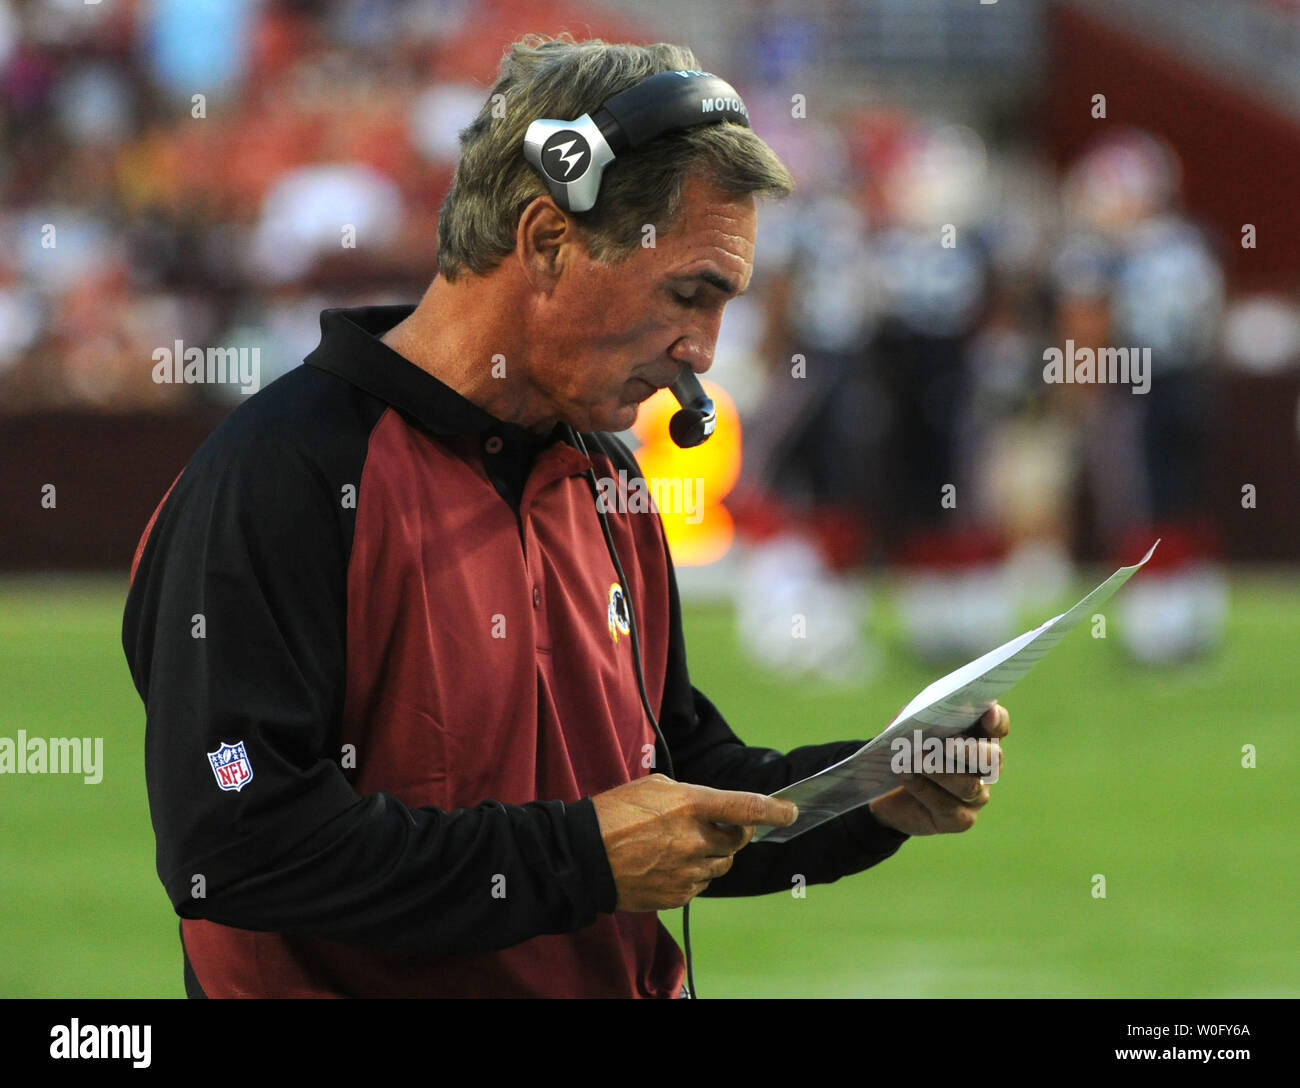 Washington Redskins' head coach Mike Shanahan coaches his team as they play their first pre-season game against the Buffalo Bills' at FedEx Field in Washington on August 13, 2010.   UPI/Kevin Dietsch Stock Photo